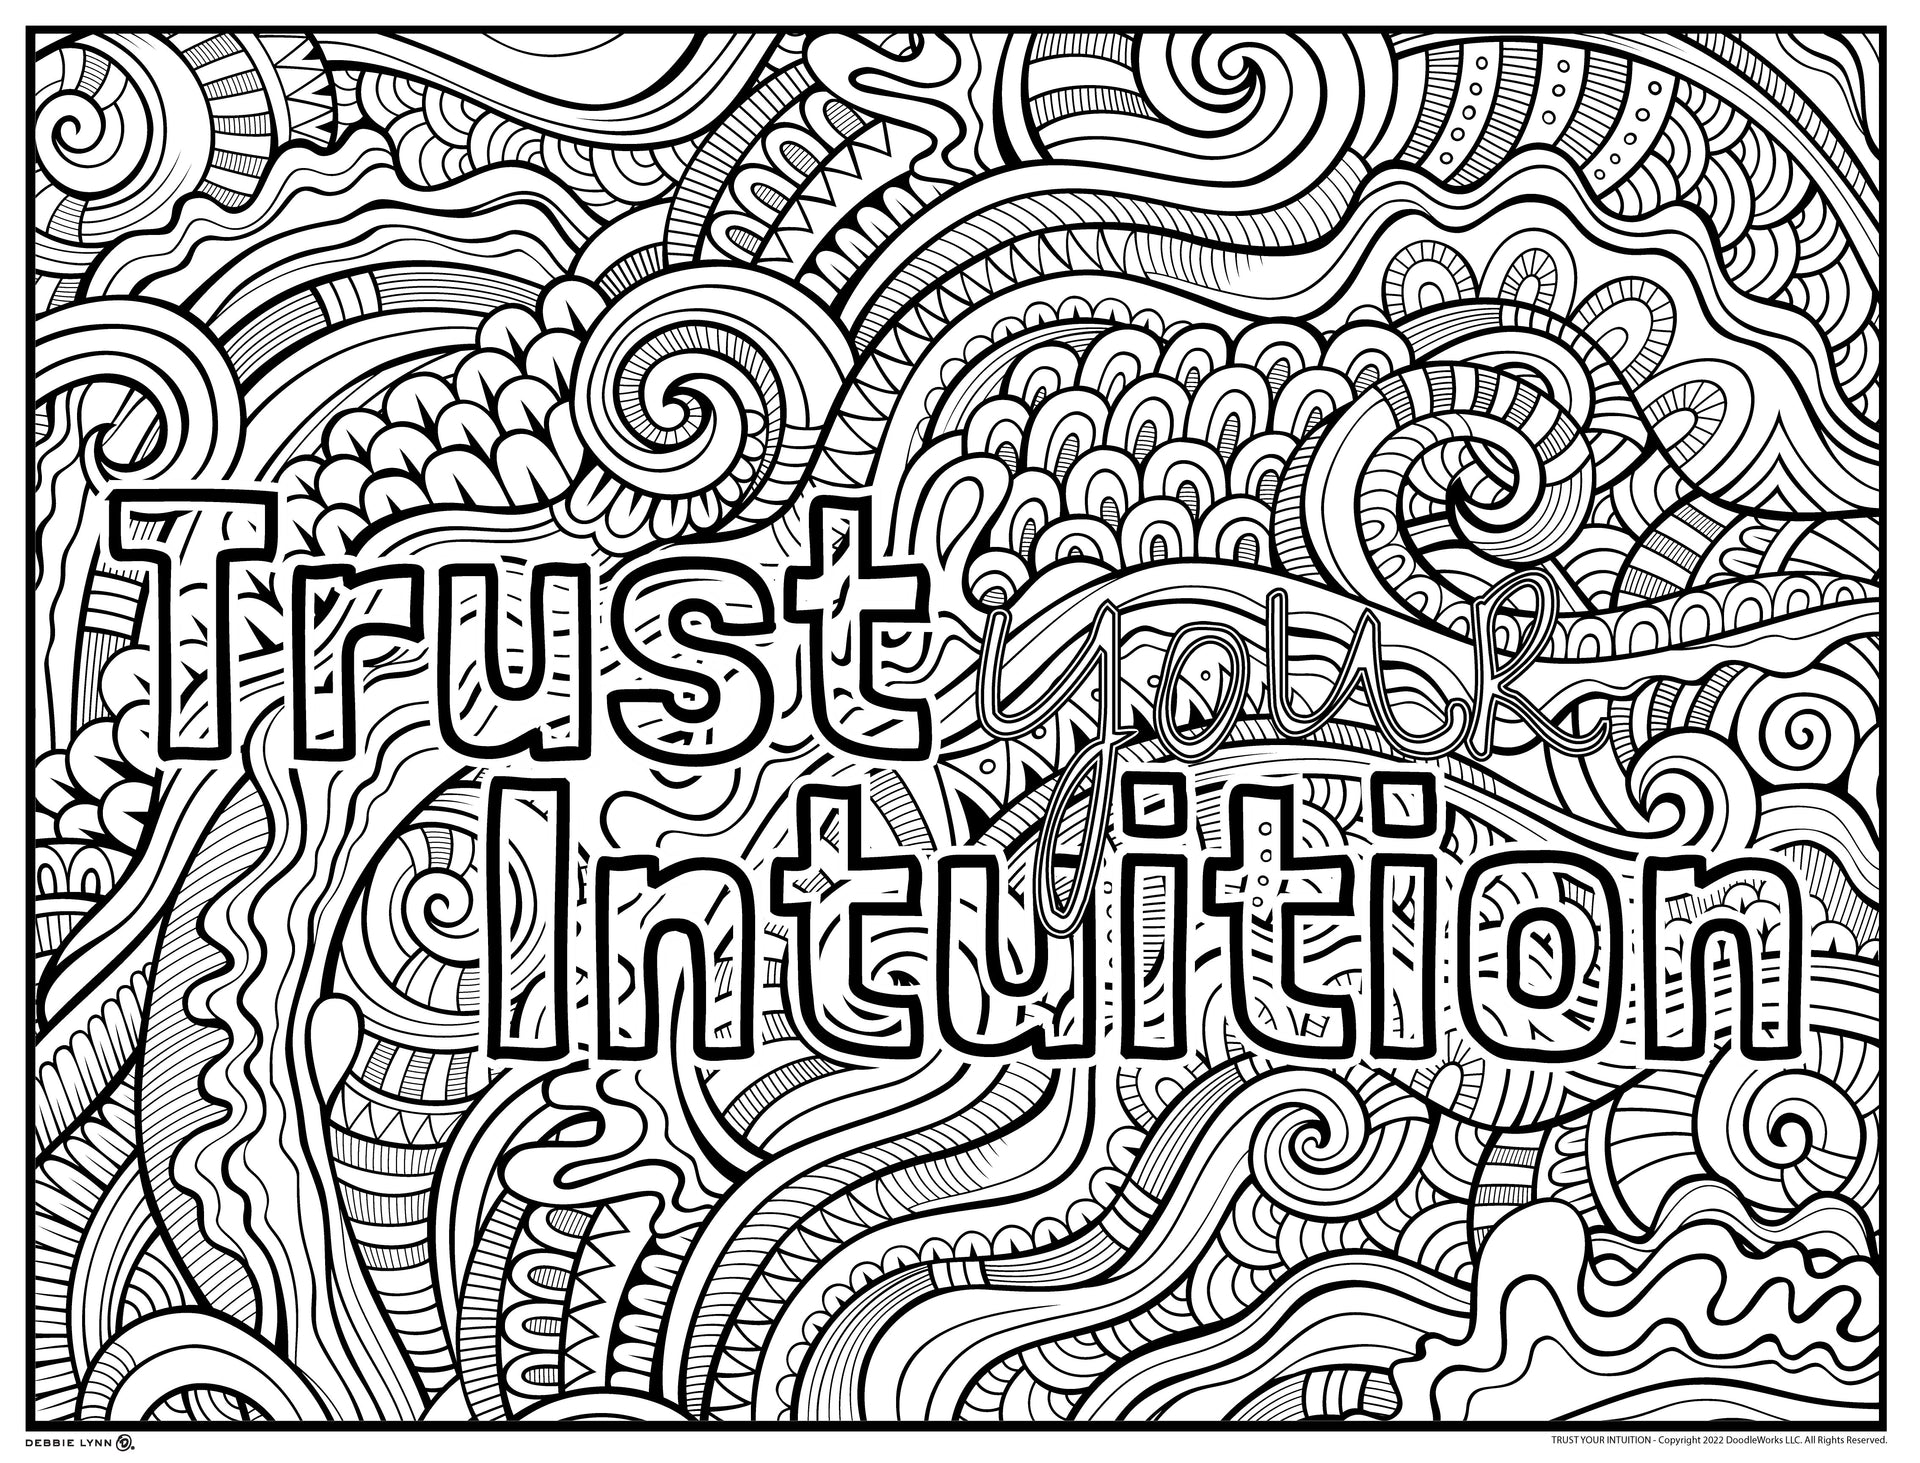 Trust your intuition personalized giant coloring poster x â debbie lynn